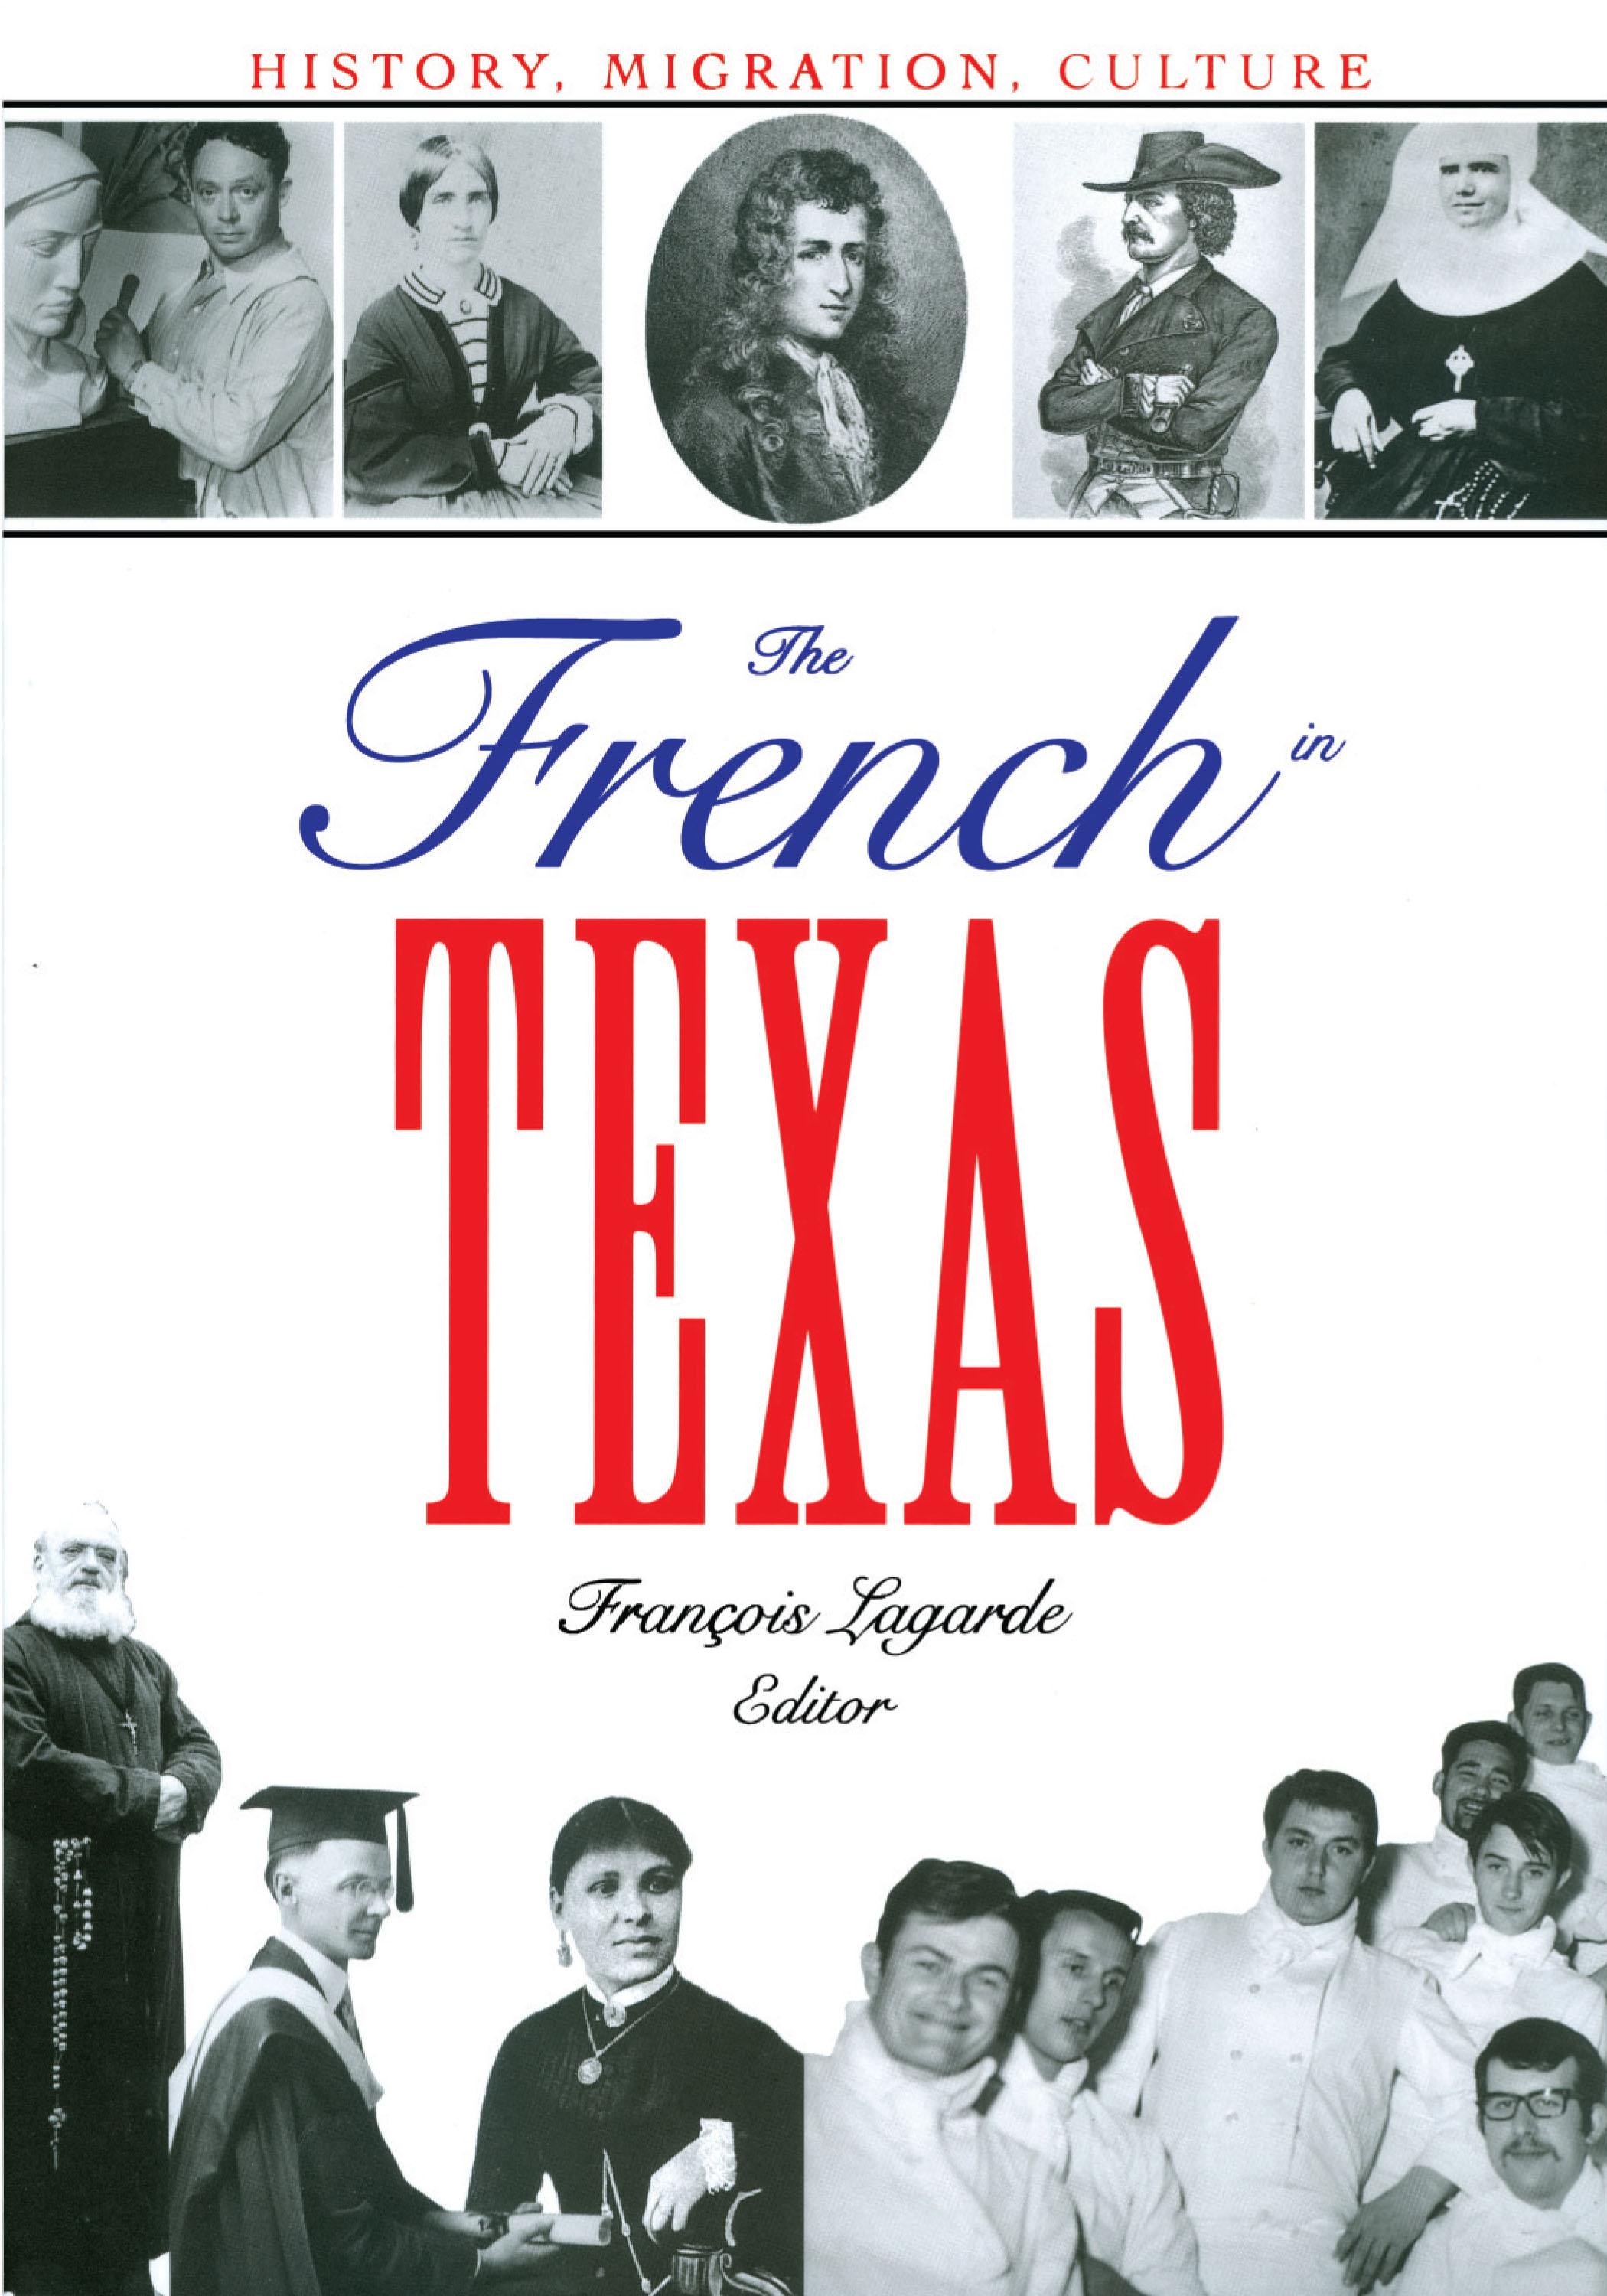 The French in Texas